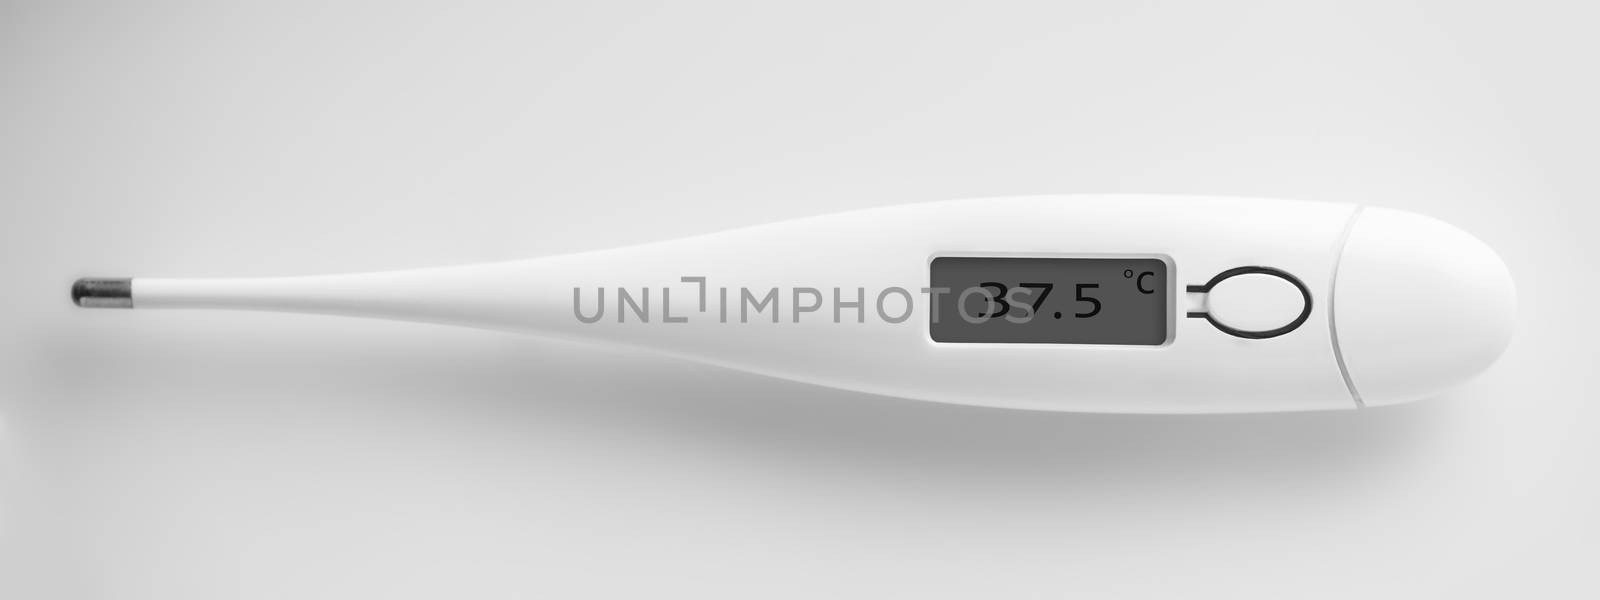 the electronic thermometer closeup on a white background